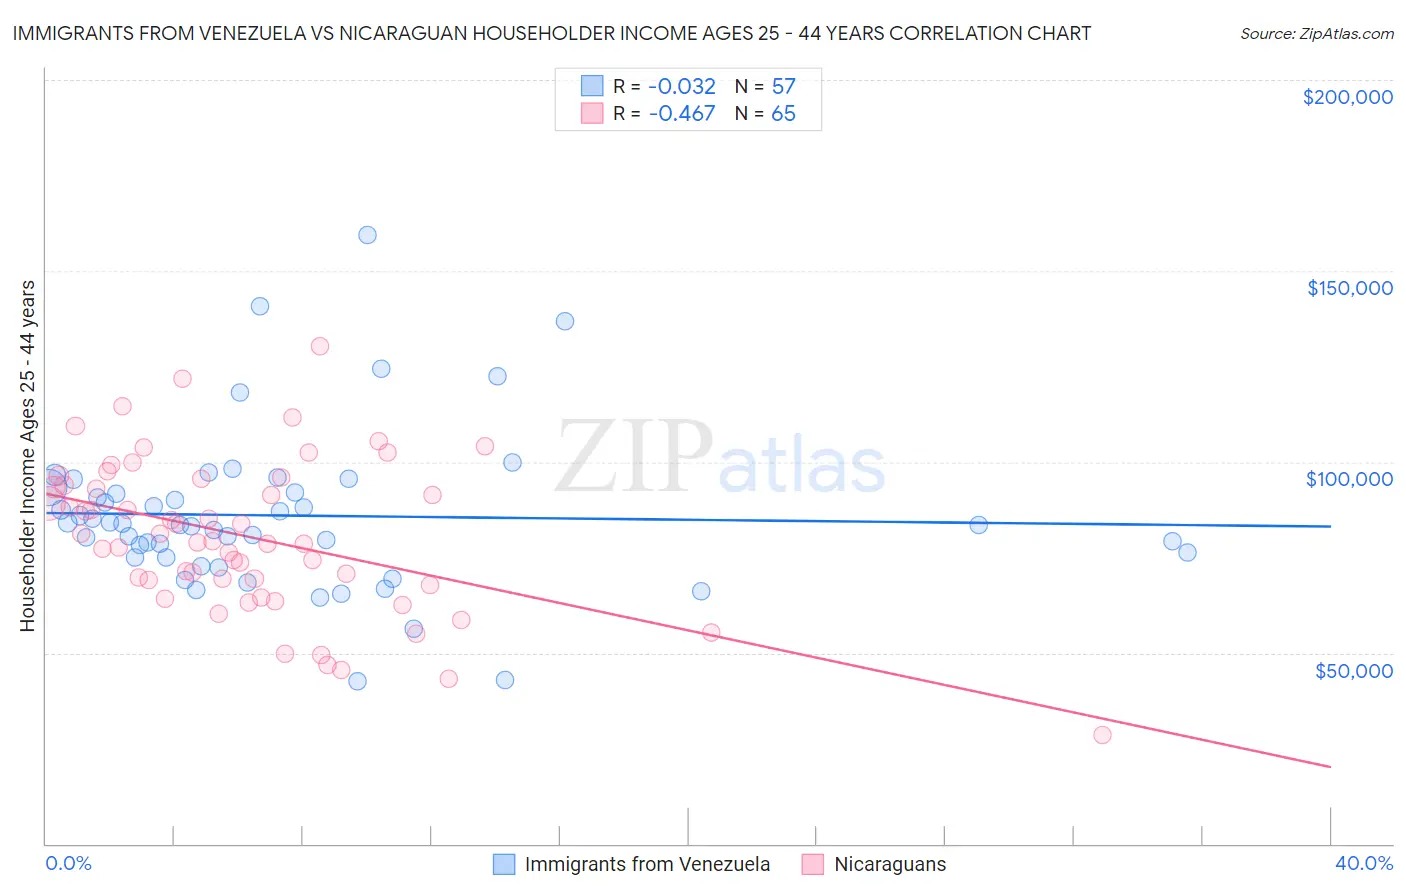 Immigrants from Venezuela vs Nicaraguan Householder Income Ages 25 - 44 years